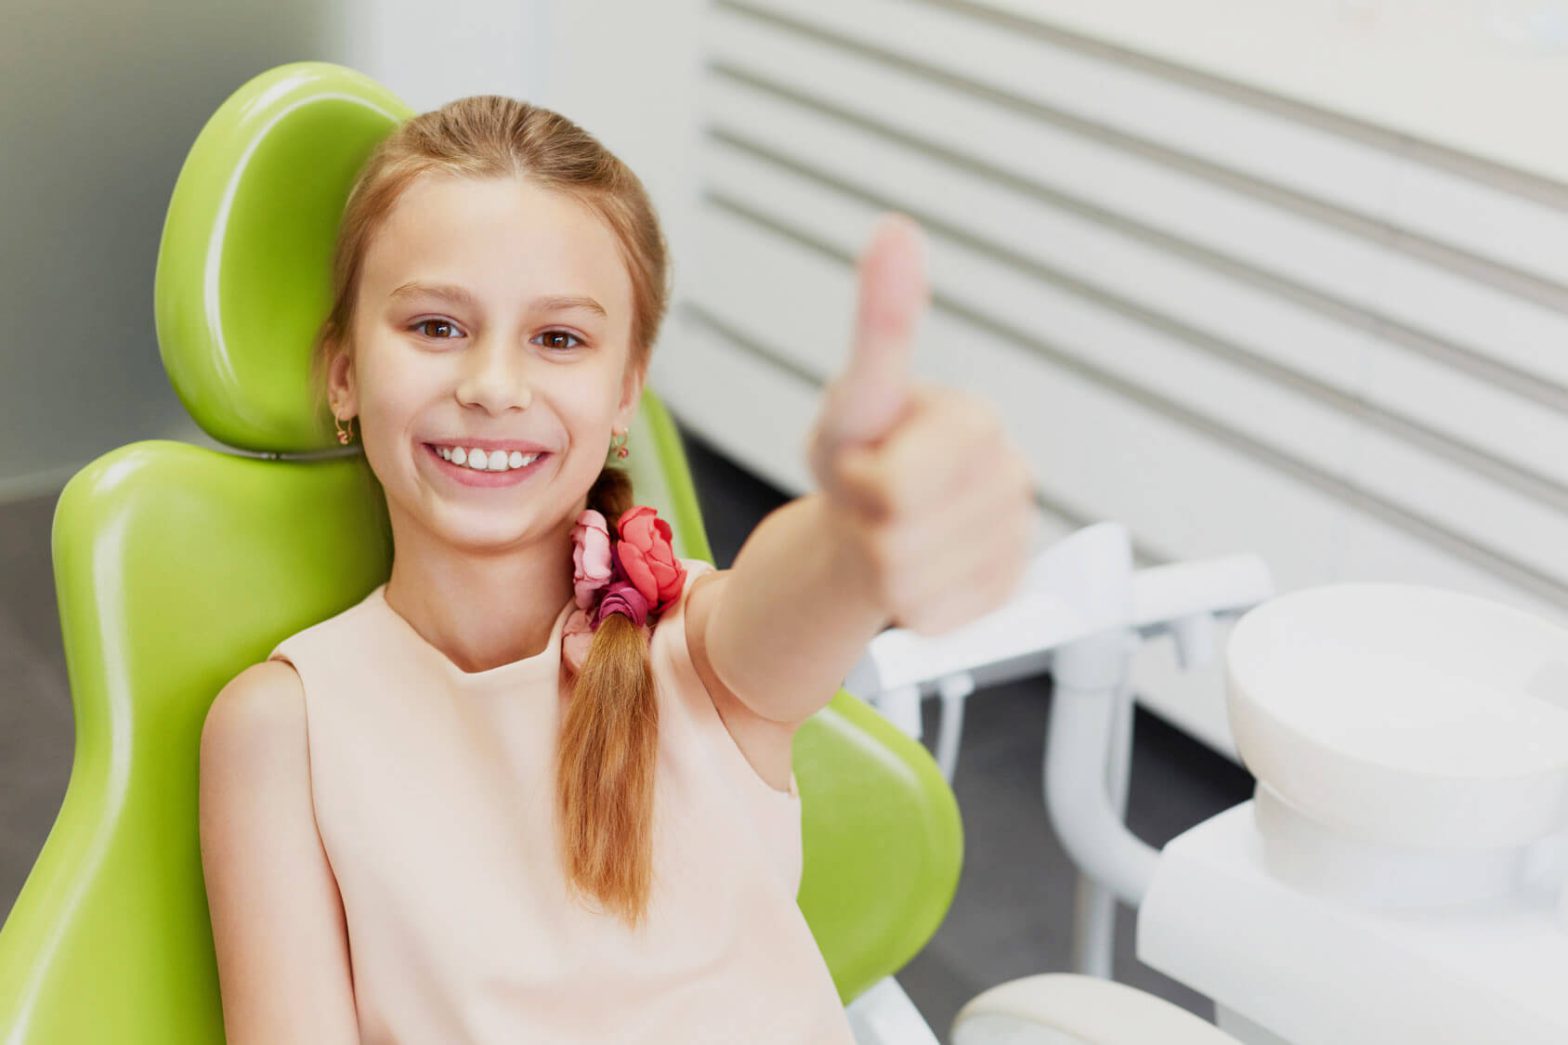 When Should Children See An Orthodontist?